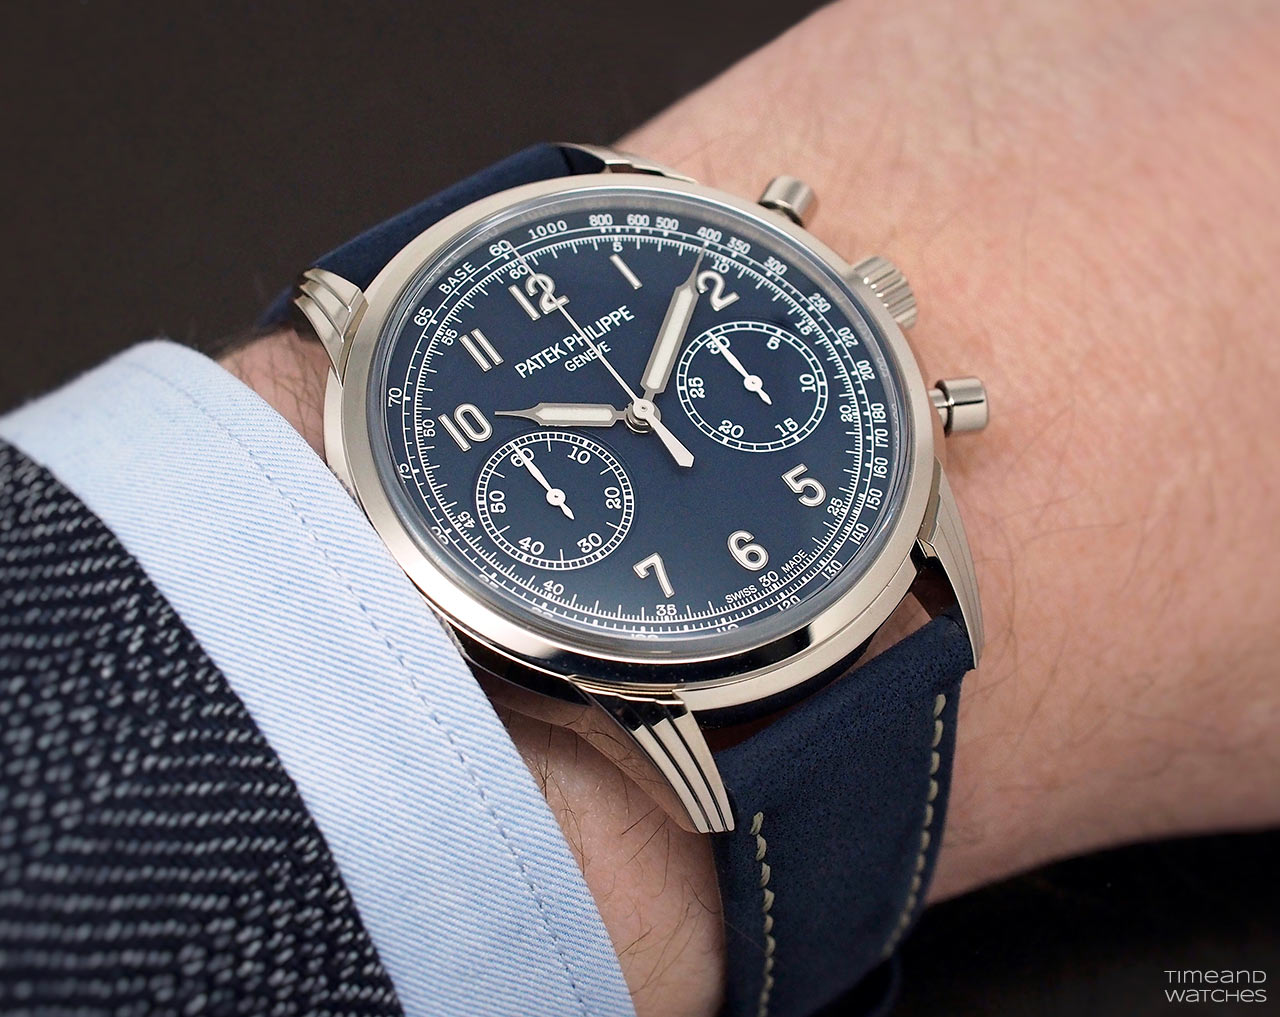 Patek Philippe - Ref. 5172G Chronograph | Time and Watches | The watch blog